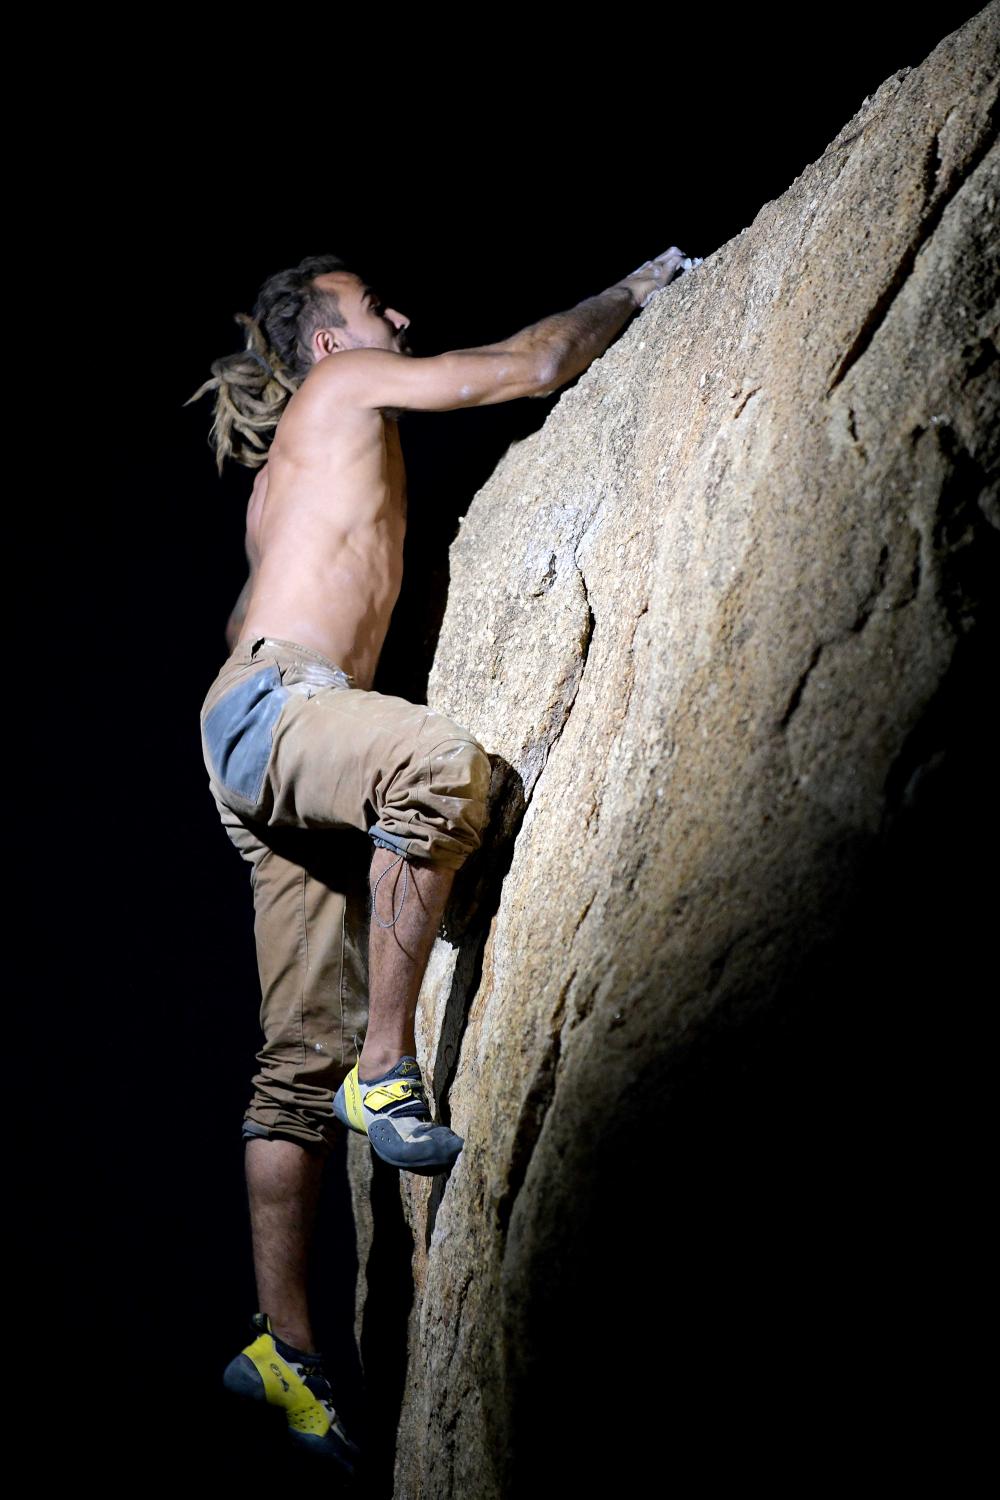 Life on the rocks - Climbers can do this all night long